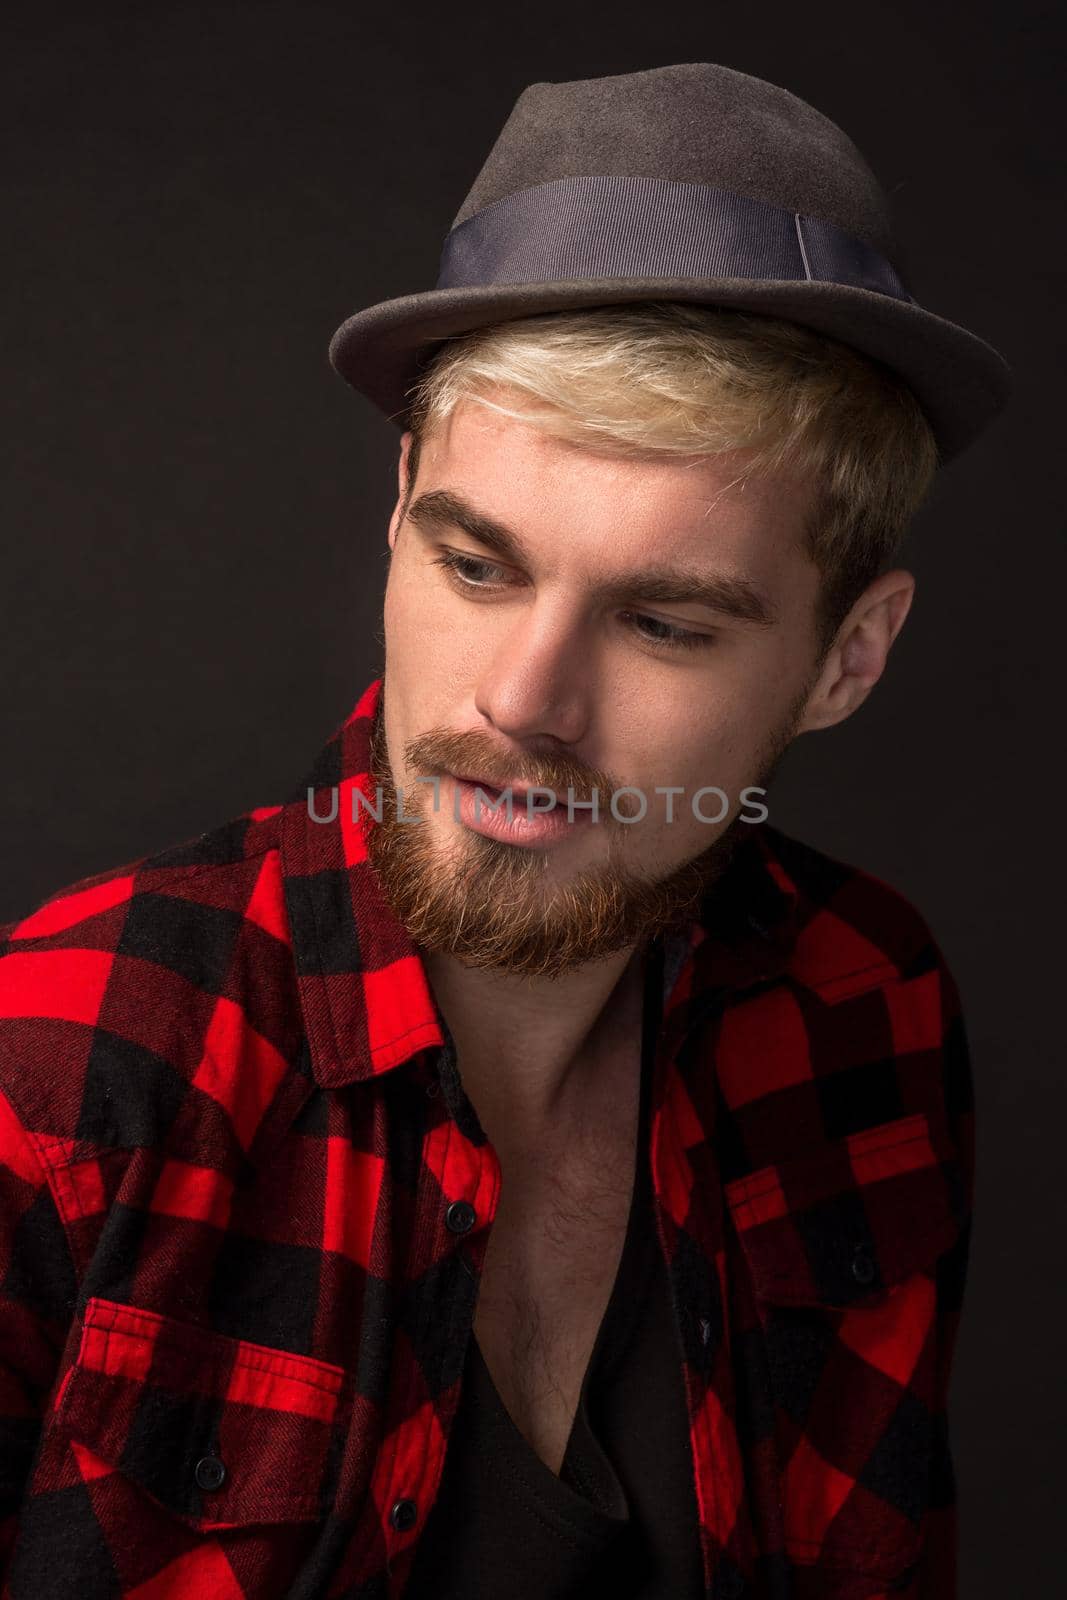 Close-up portrait of attractive young bearded hipster man wearing hat dressed in shirt in a cage isolated over black background. Studio shot